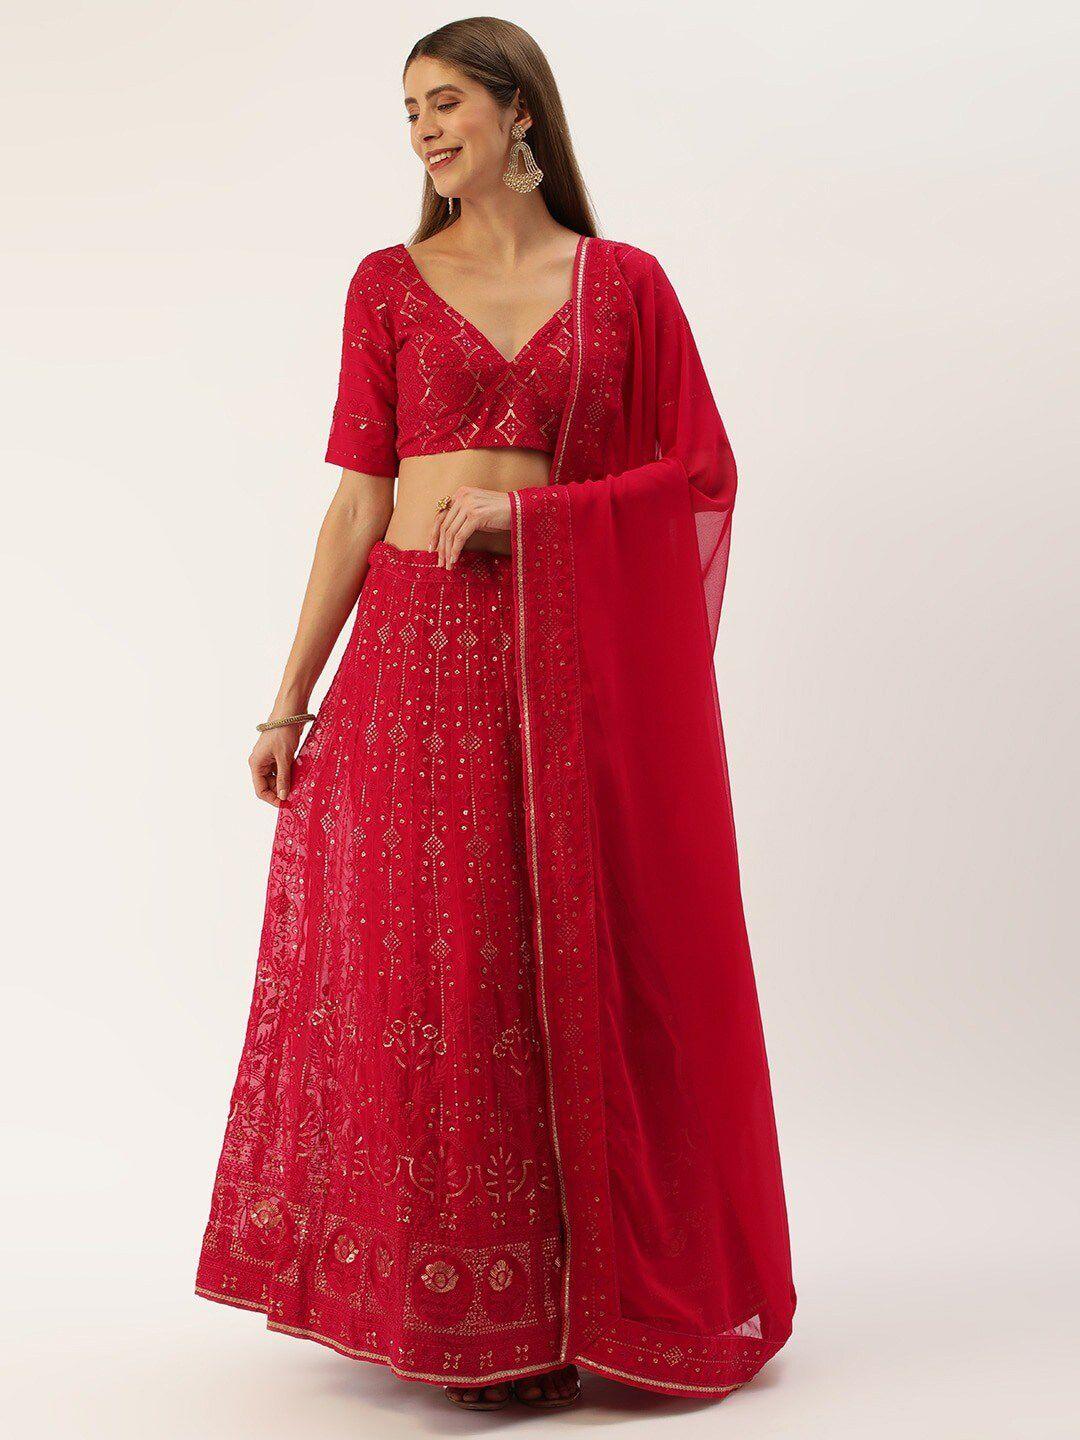 udbhav textile maroon & gold-toned embroidered sequinned semi-stitched lehenga & unstitched blouse with